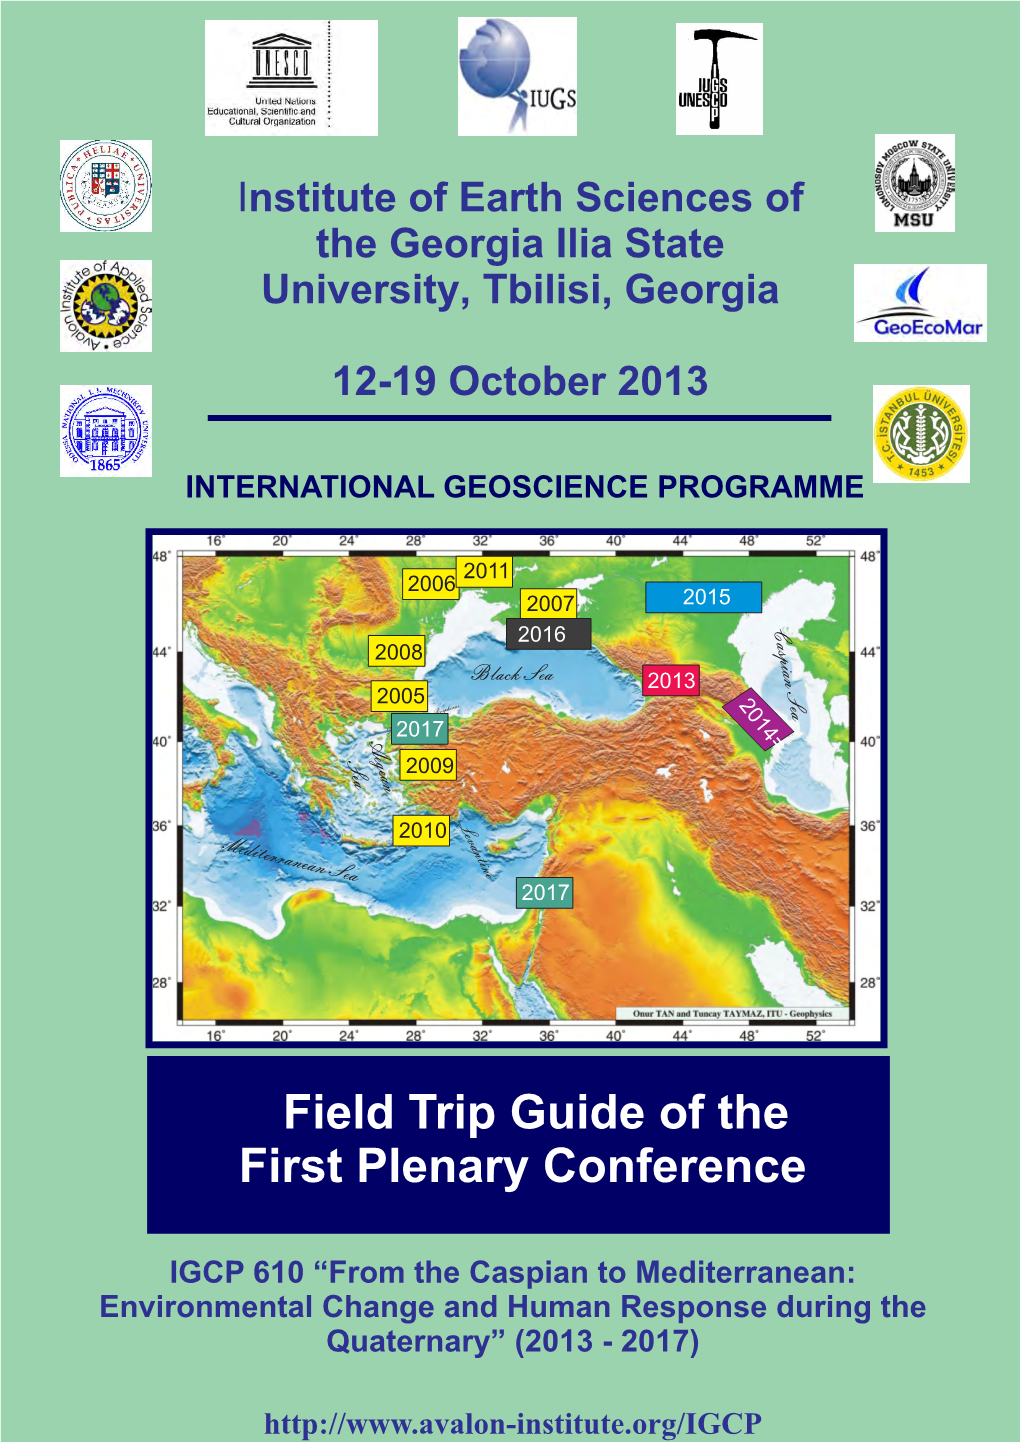 Field Trip Guide of the First Plenary Conference